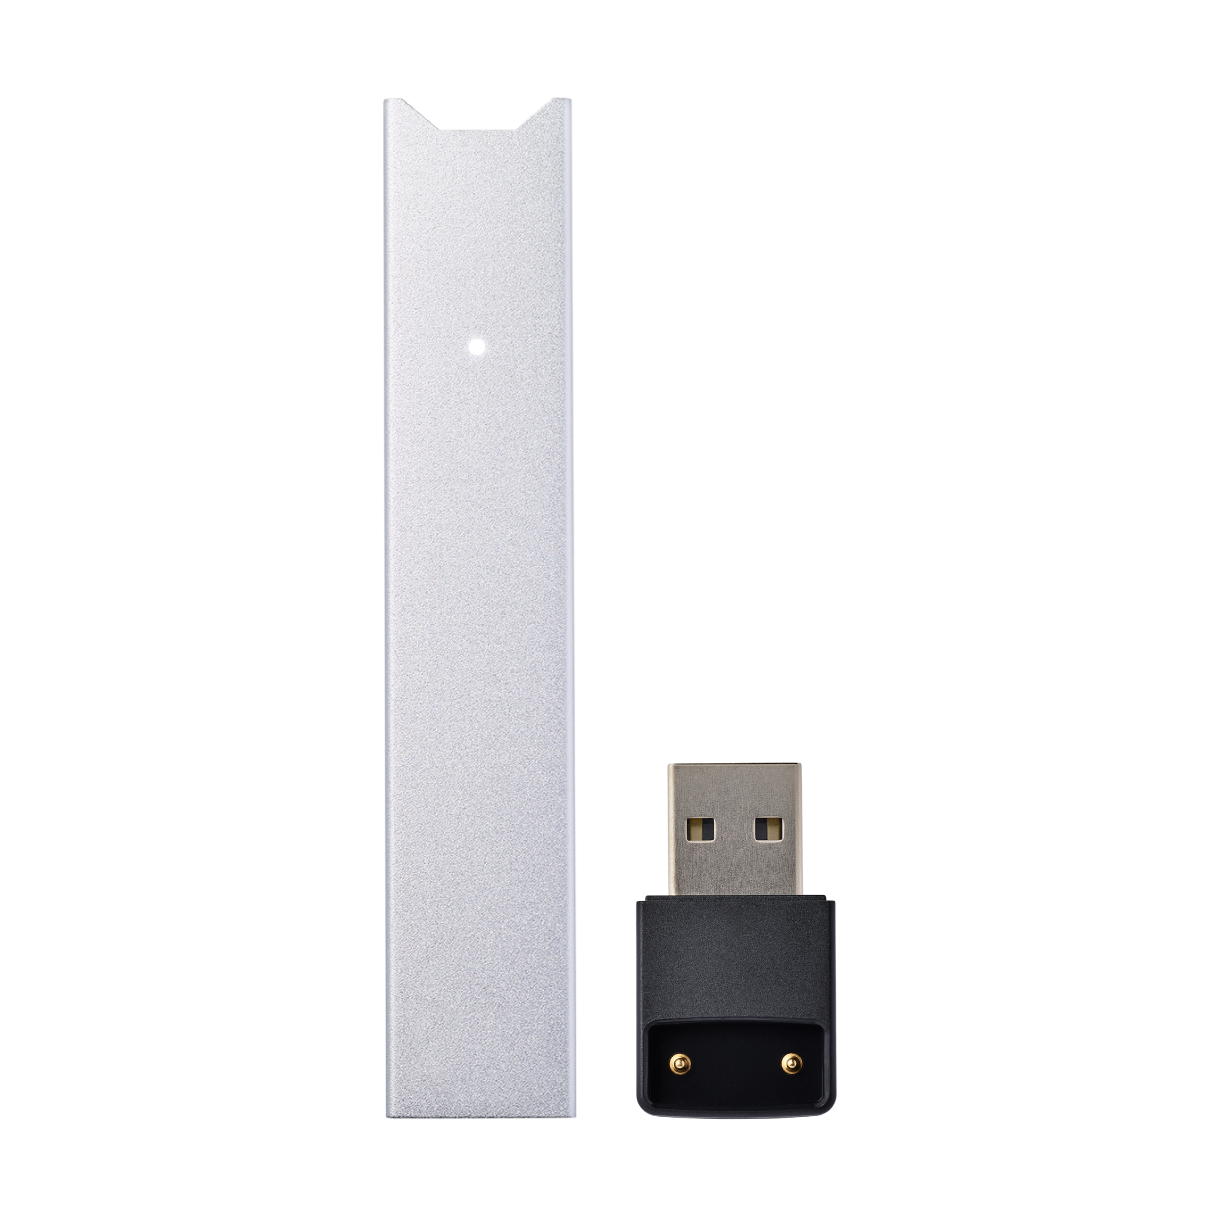 Buy JUUL2 Devices, Accessories and JUUL2 pods Online | JUUL | UK